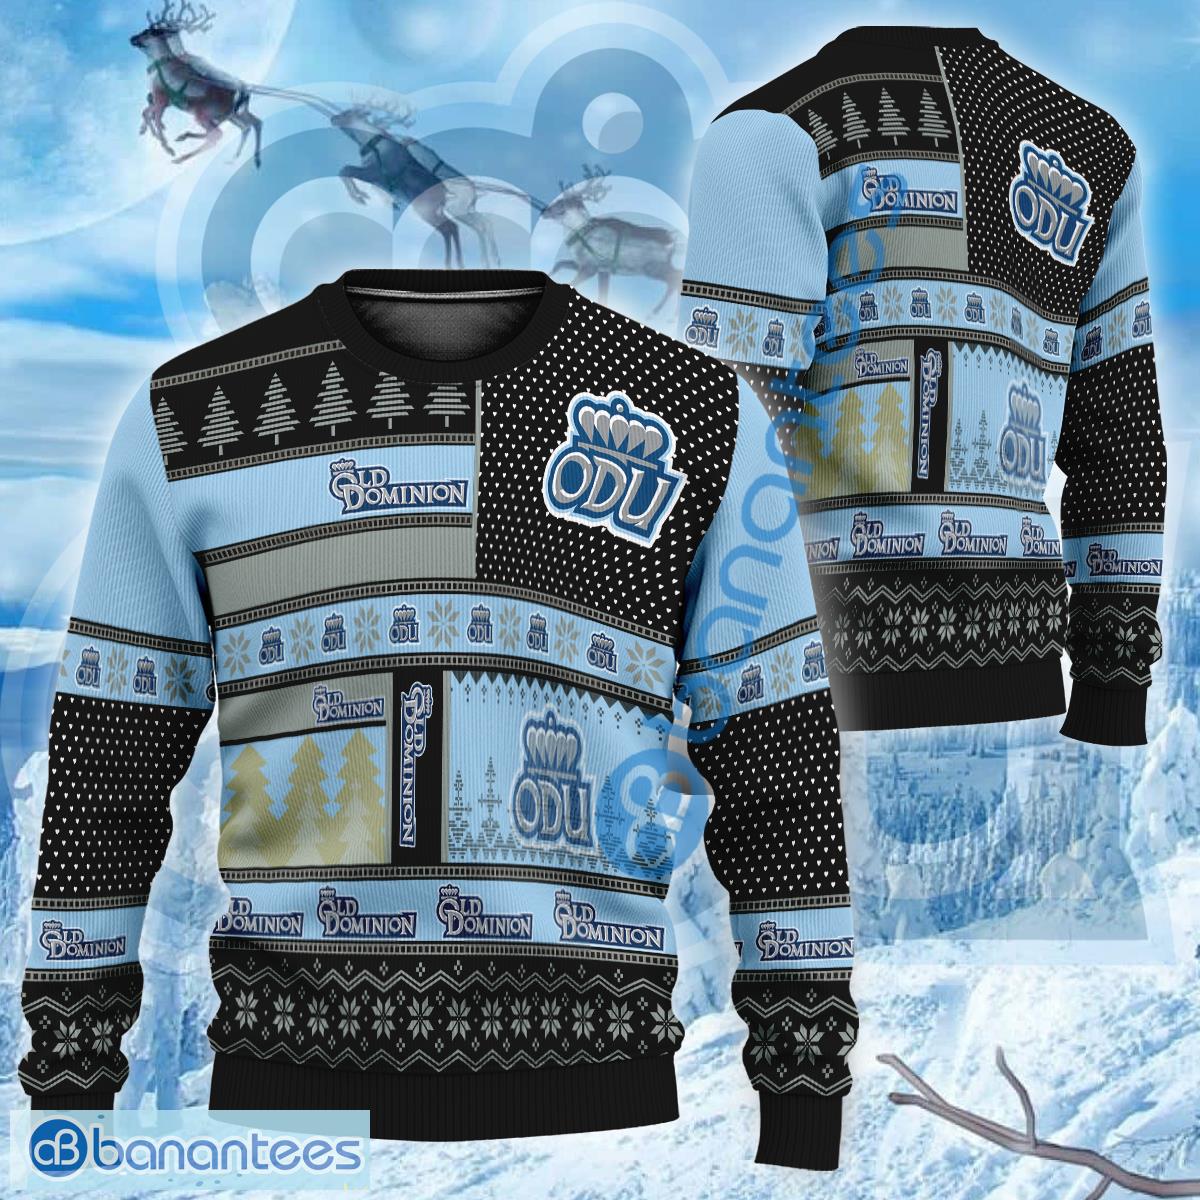 NCAA Old Dominion Monarchs Logo New Style Knitted Christmas Sweater For Men And Women - NCAA Old Dominion Monarchs Logo New Style Knitted Christmas Sweater For Men And Women